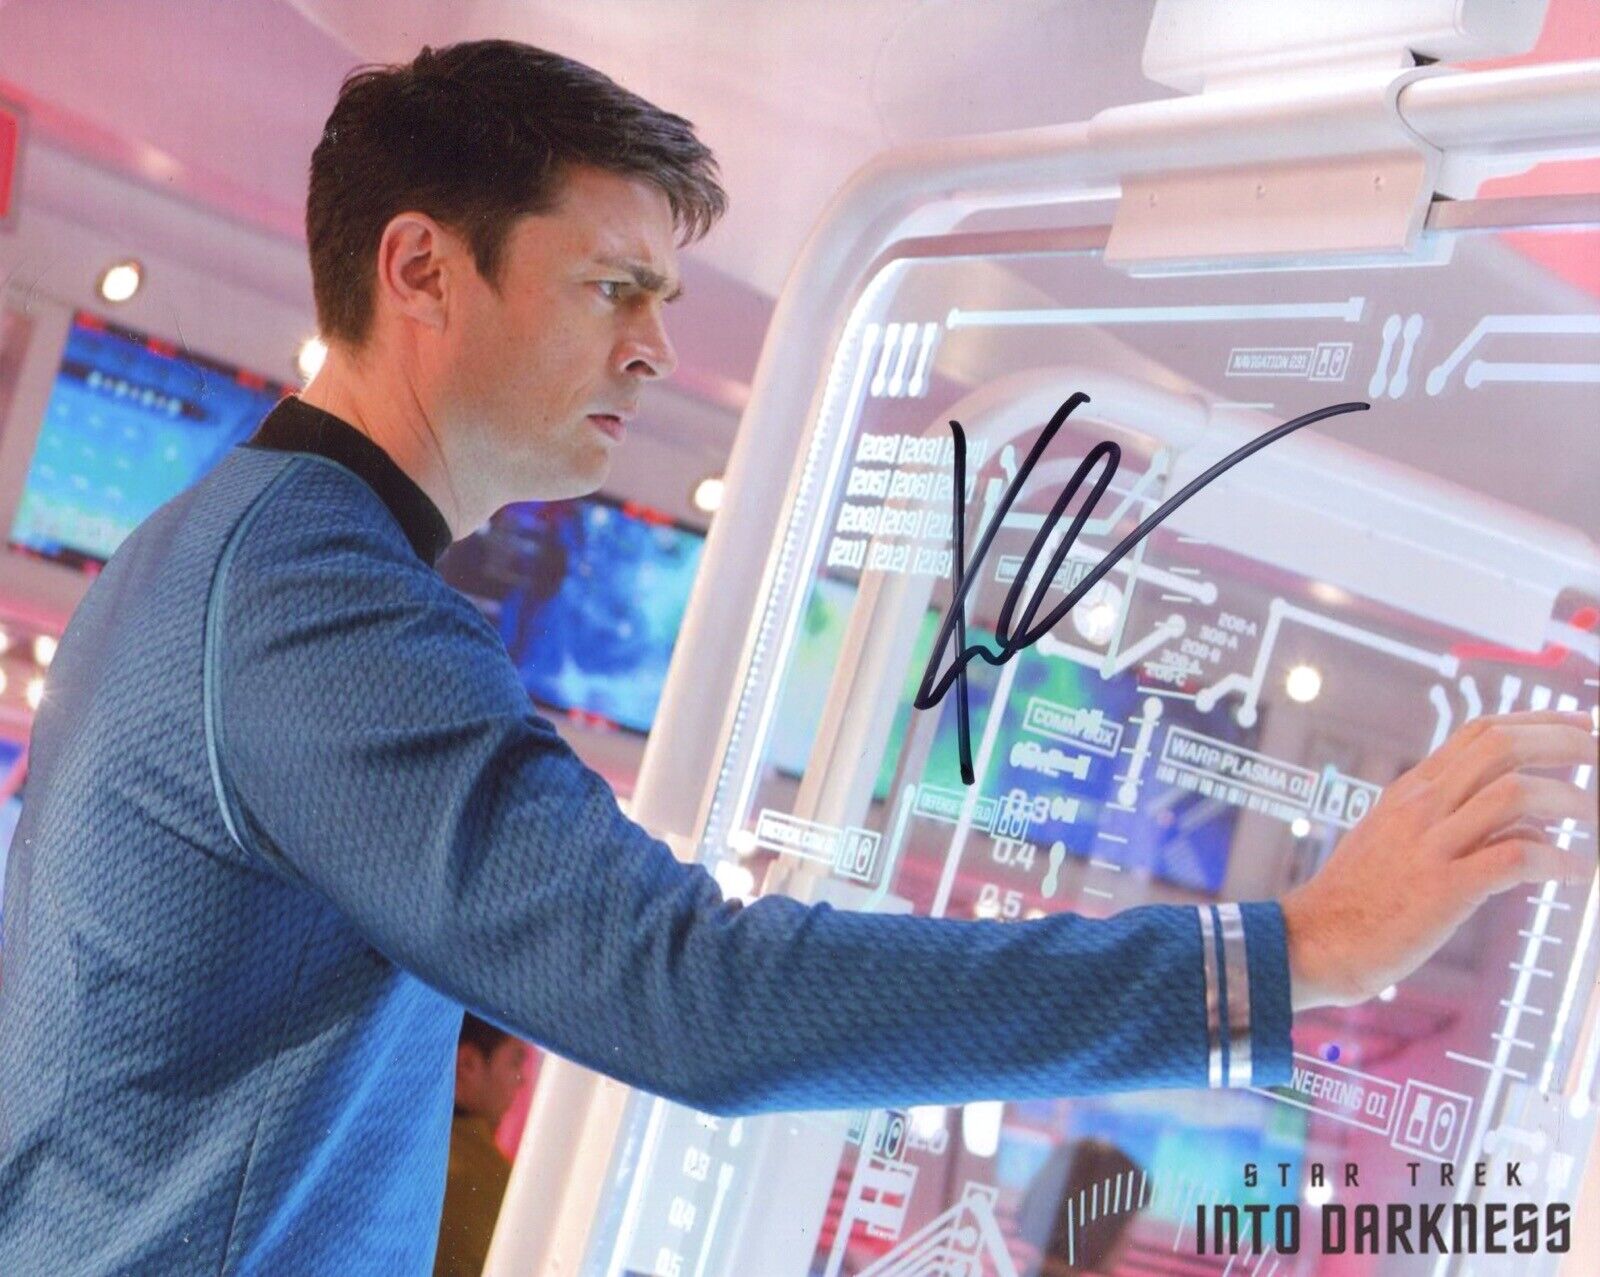 STAR TREK Into Darkness Photo Poster painting signed by actor Karl Urban